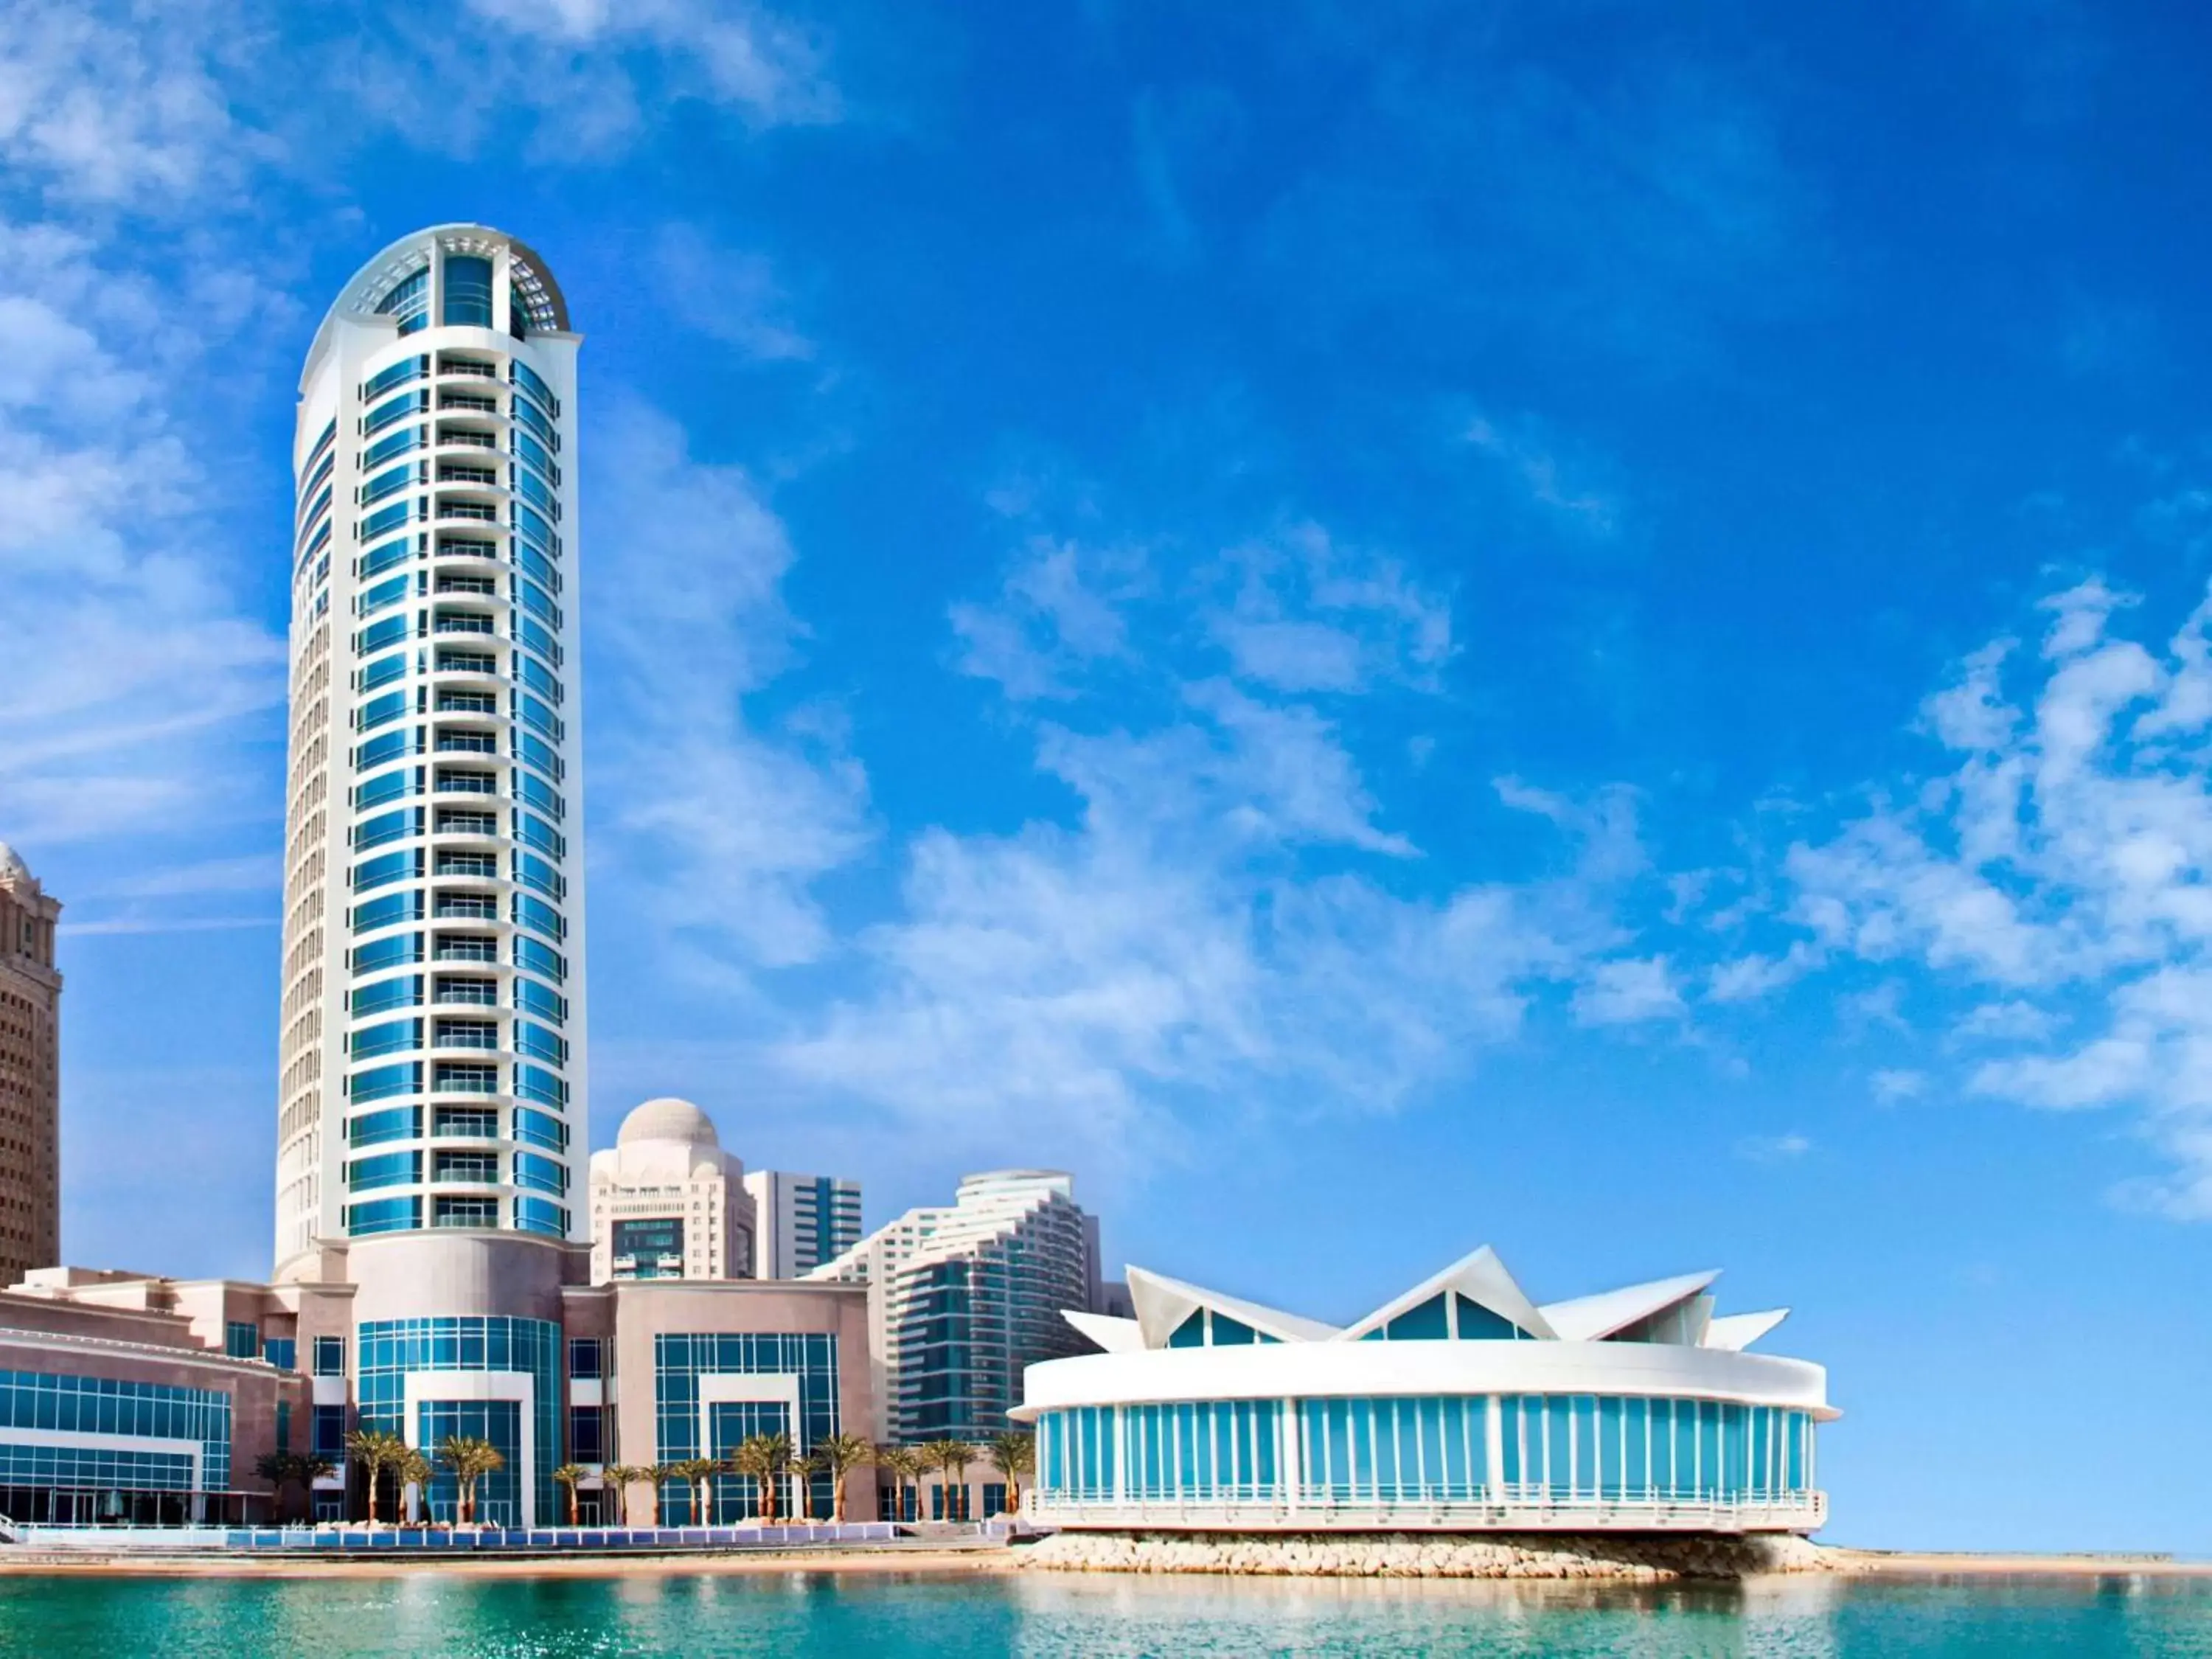 Property Building in Hilton Doha